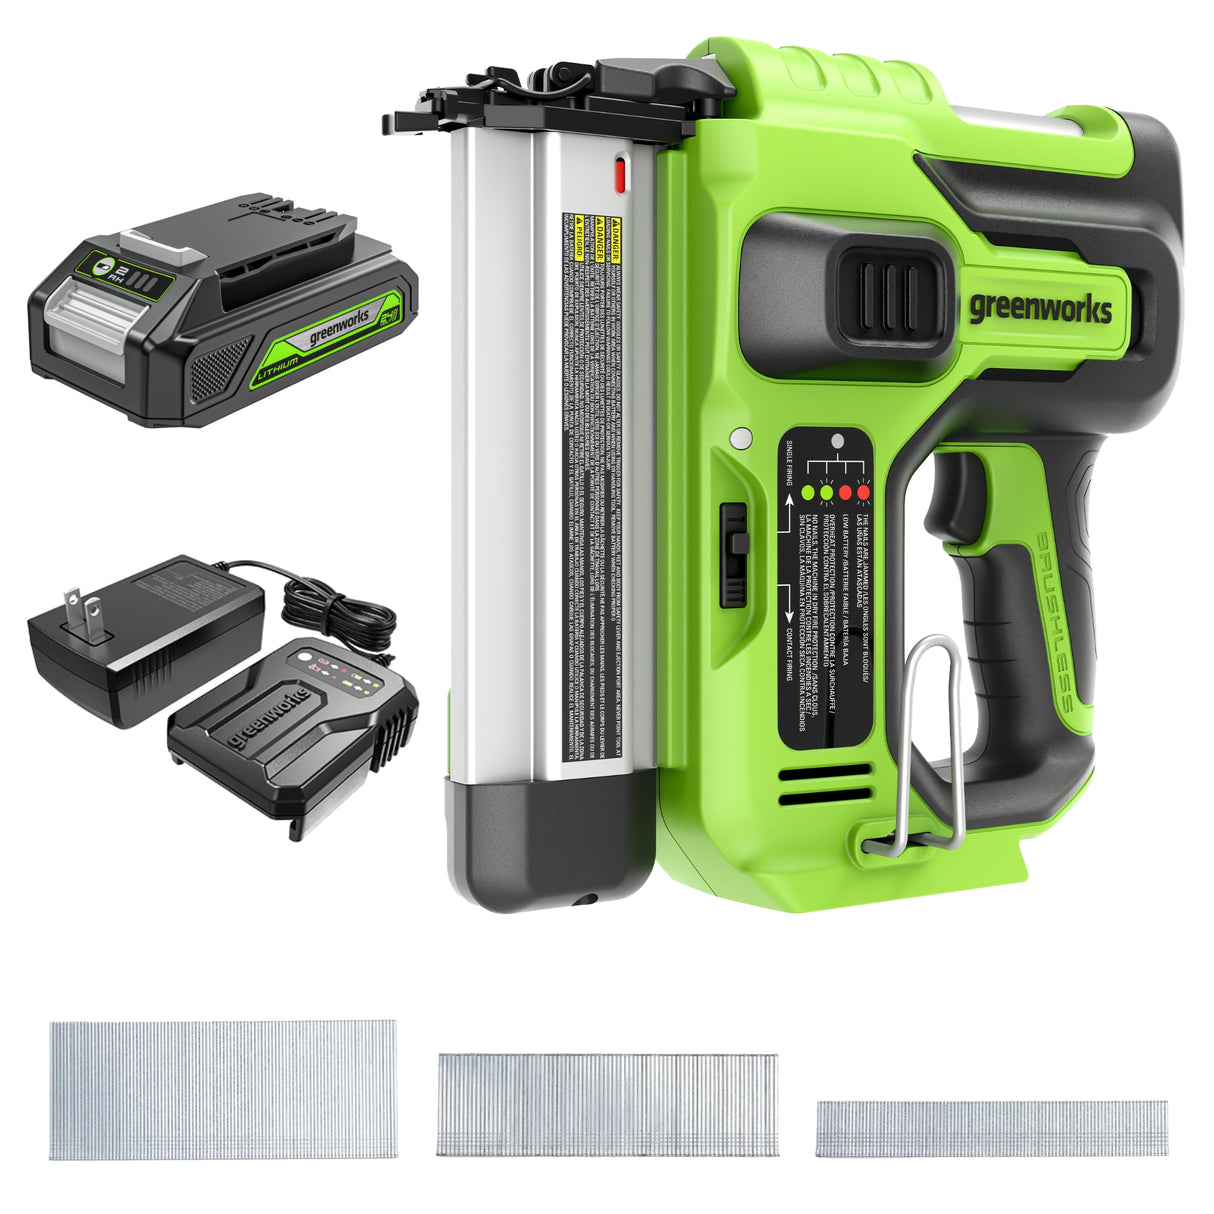 24V 18 Gauge  Brad Nailer, 2.0Ah Battery and Charger Included